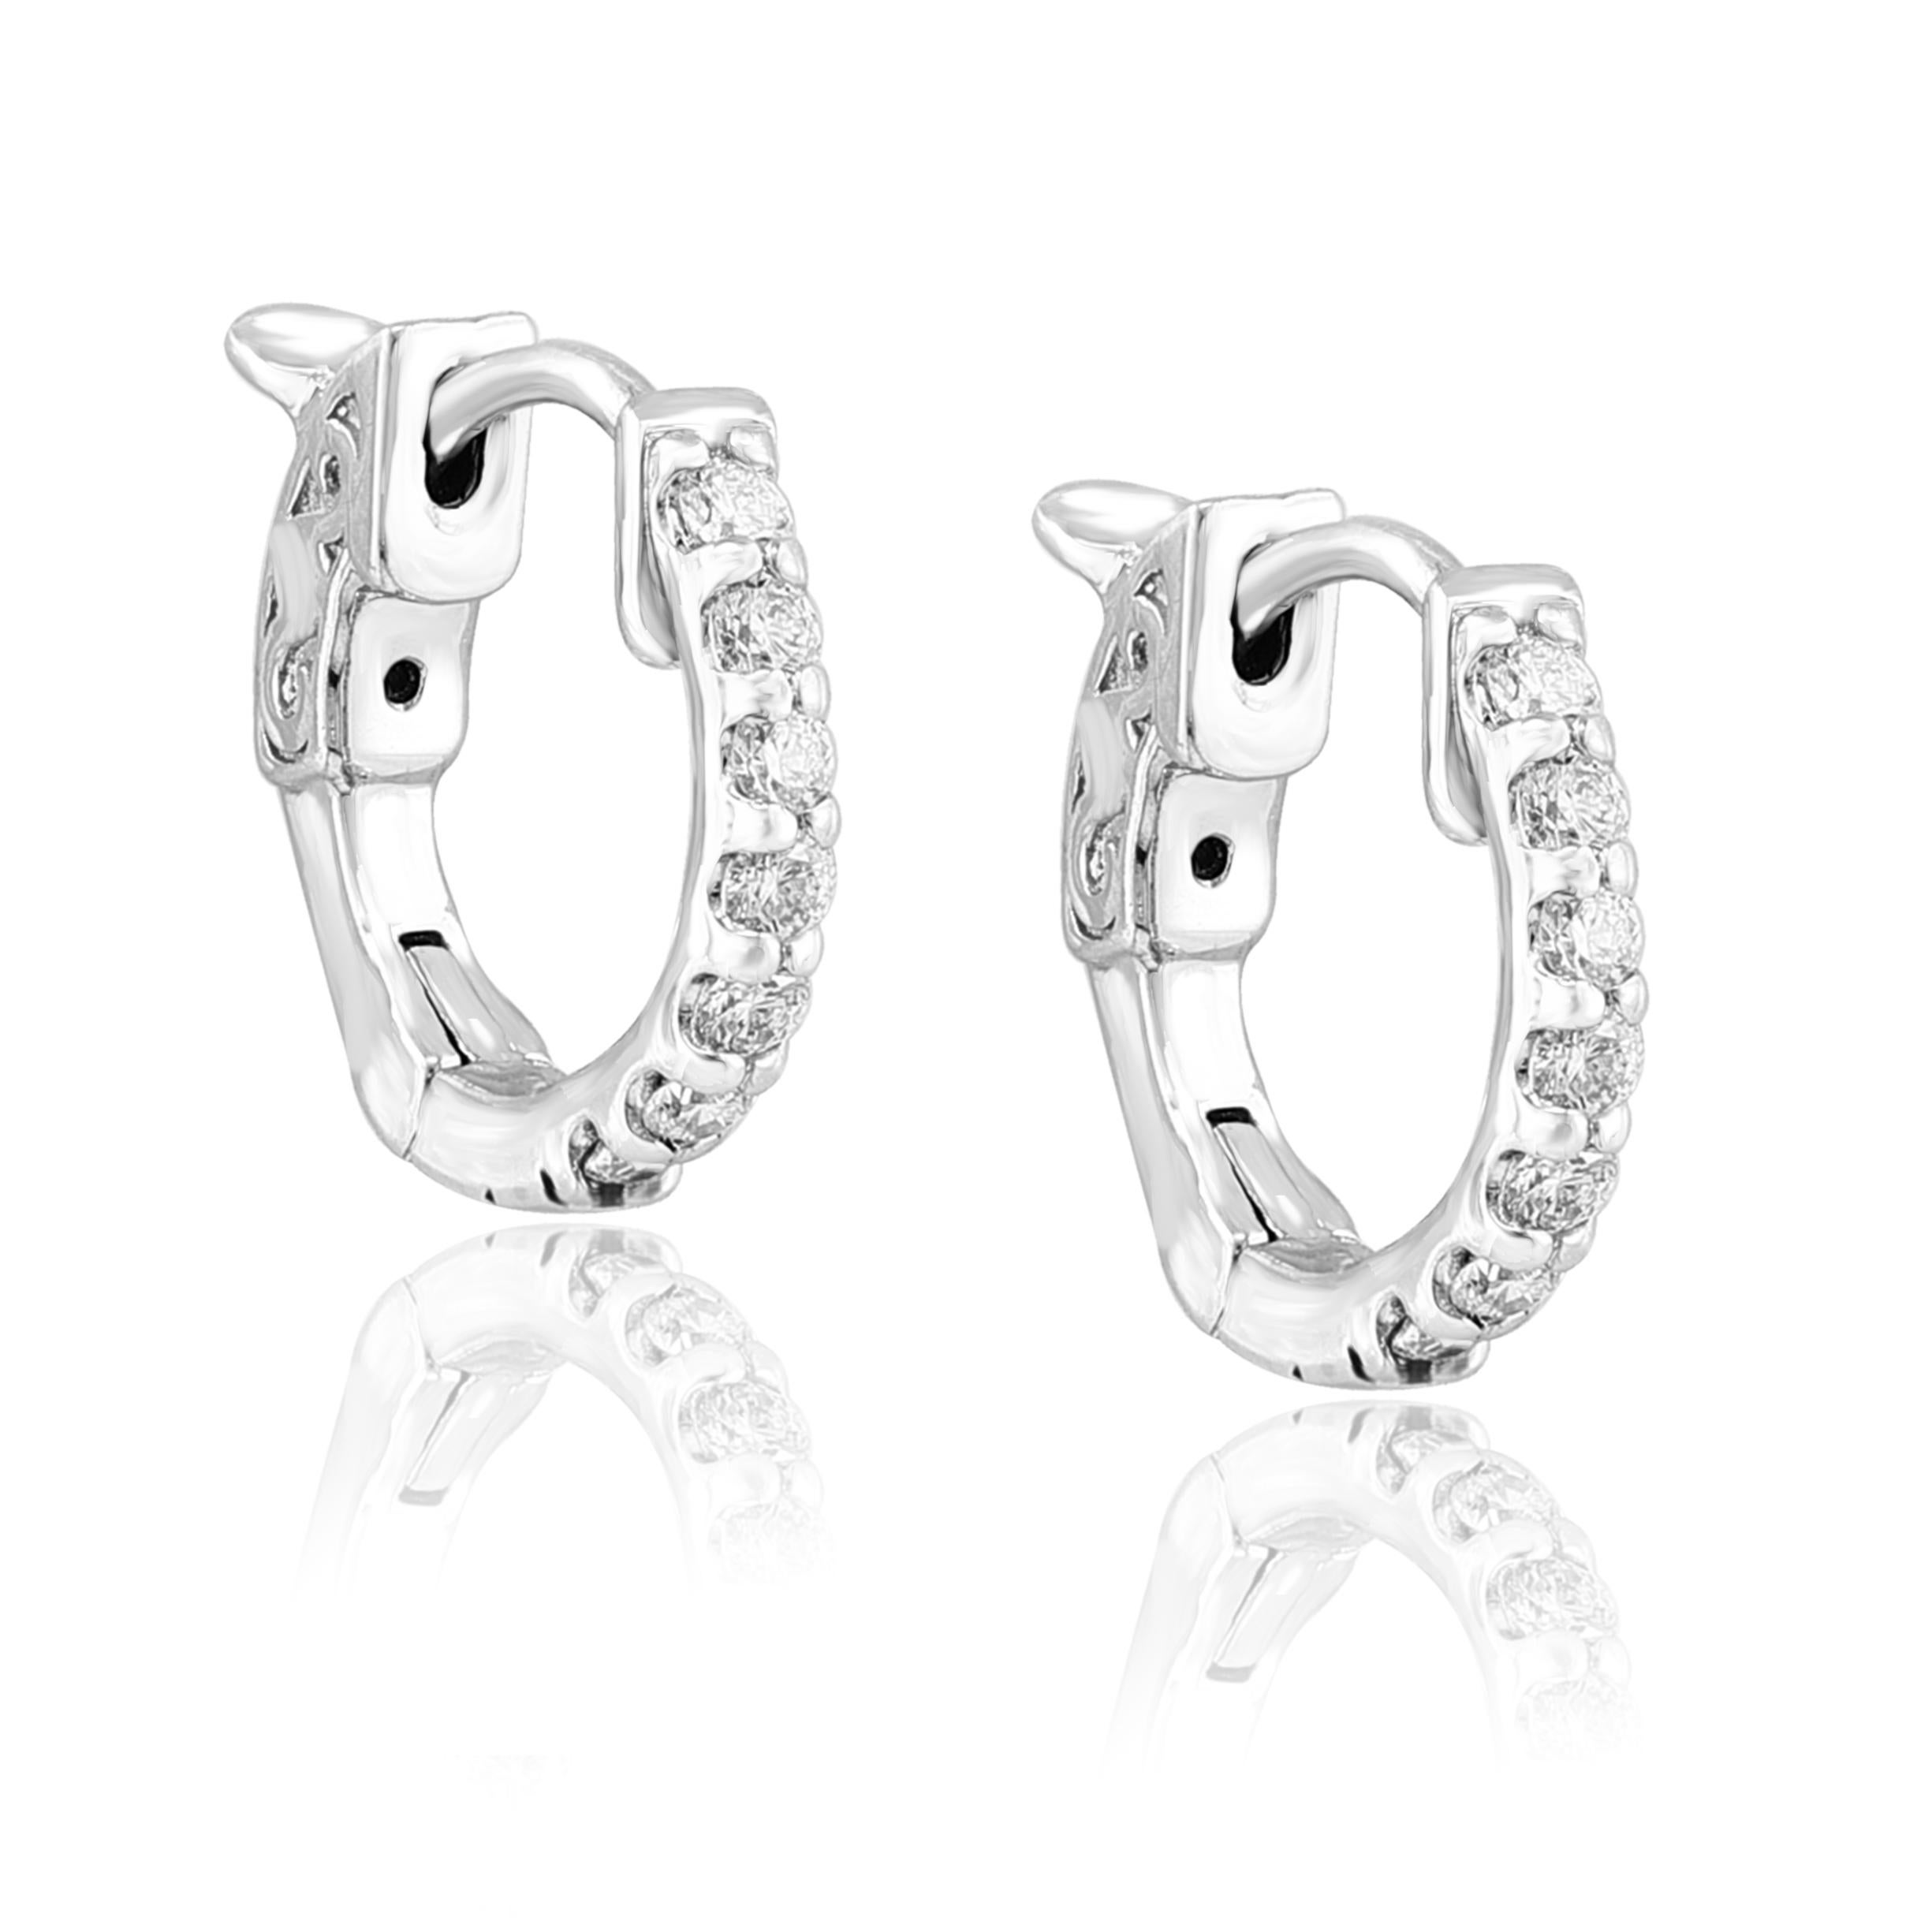 A chic and fashionable pair of hoop earrings showcasing  round diamonds, set in 14k white gold.  14 Round diamonds weigh 0.25 carats total. A beautiful piece of jewelry.


All diamonds are GH color SI1 Clarity.
Style available in different price